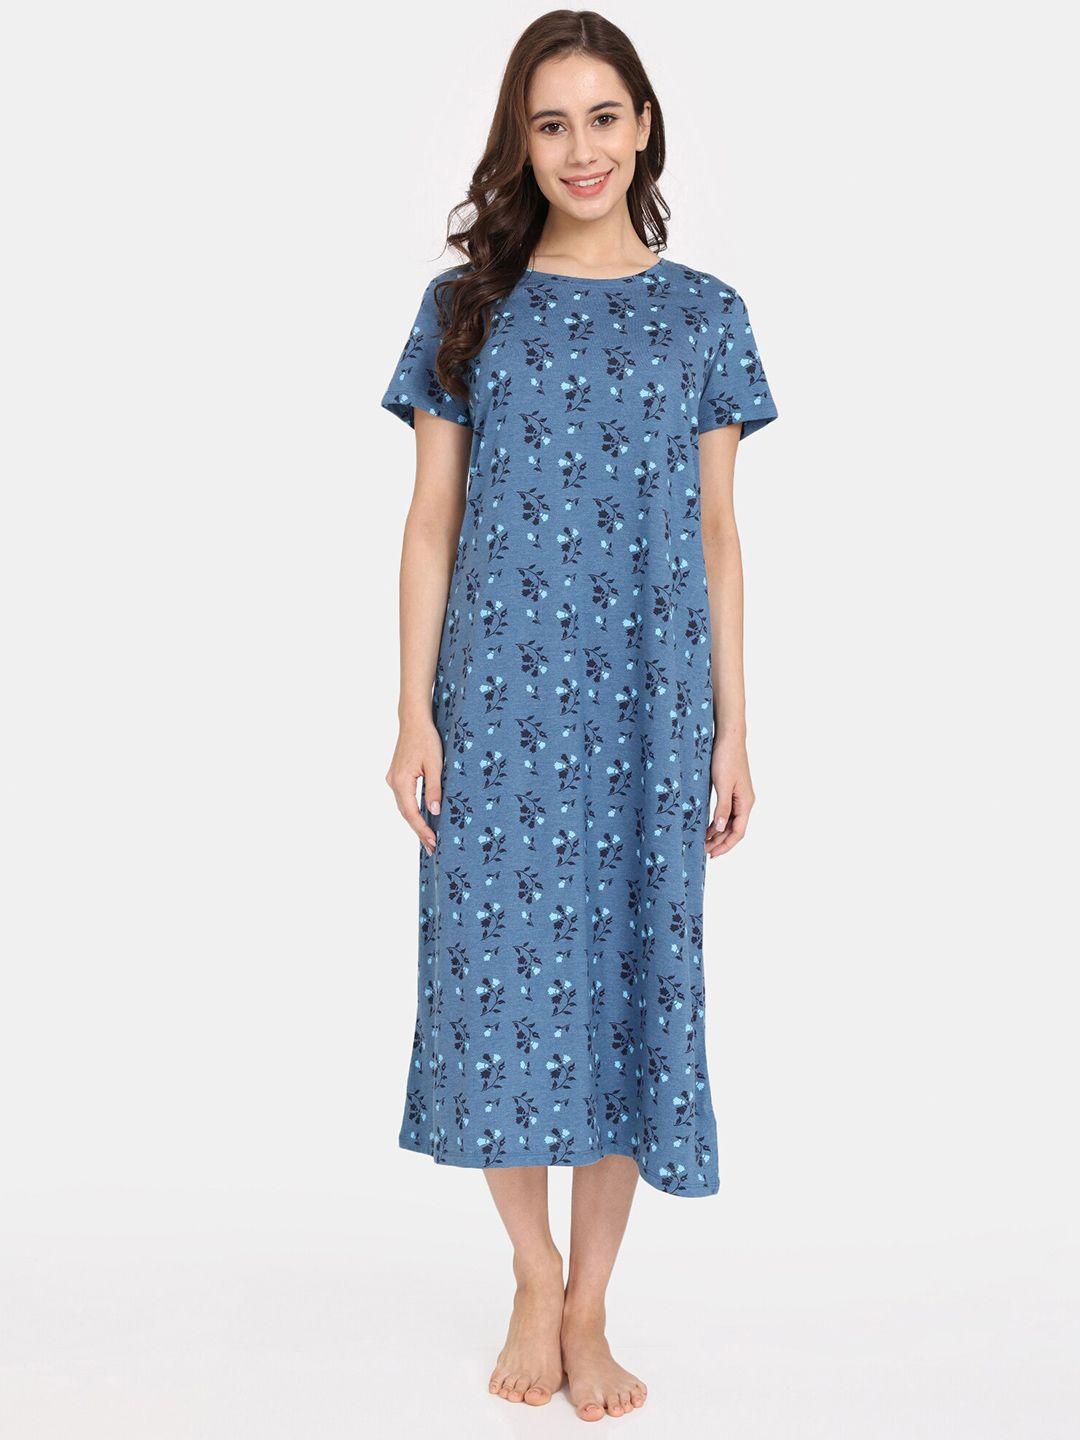 rosaline by zivame floral printed nightdress